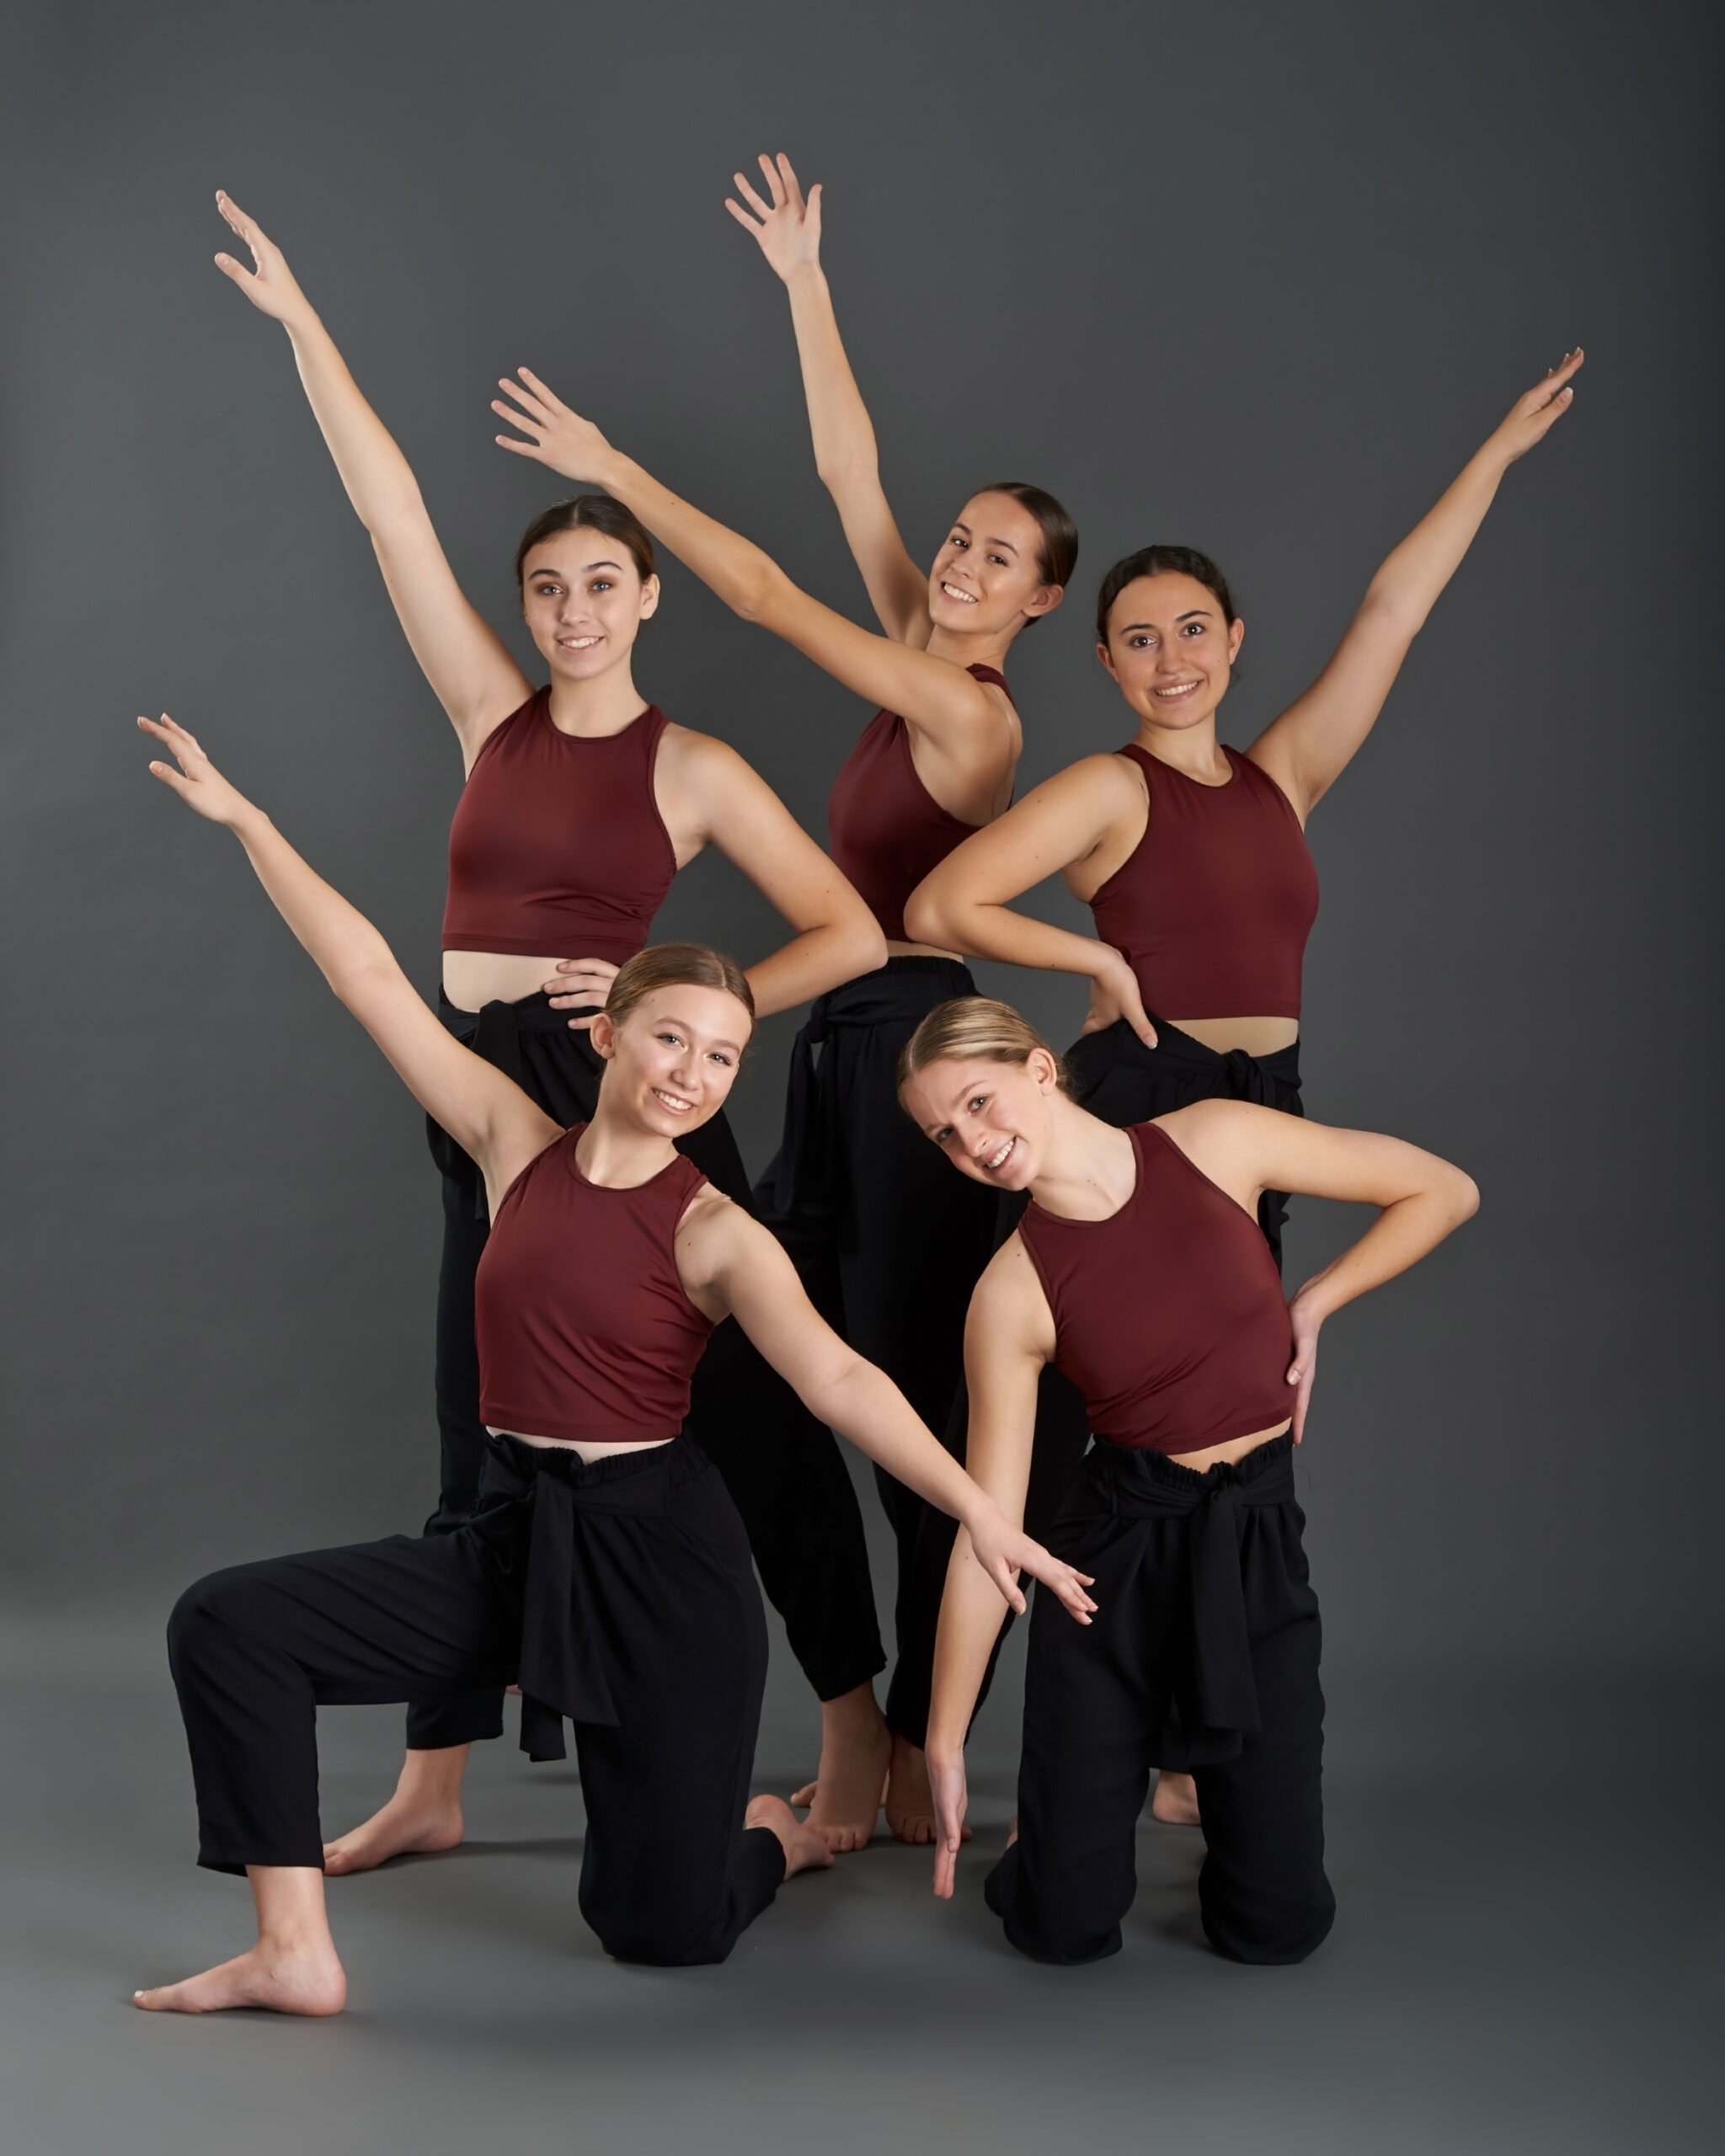 dancers posing in red shirts with black dance pants